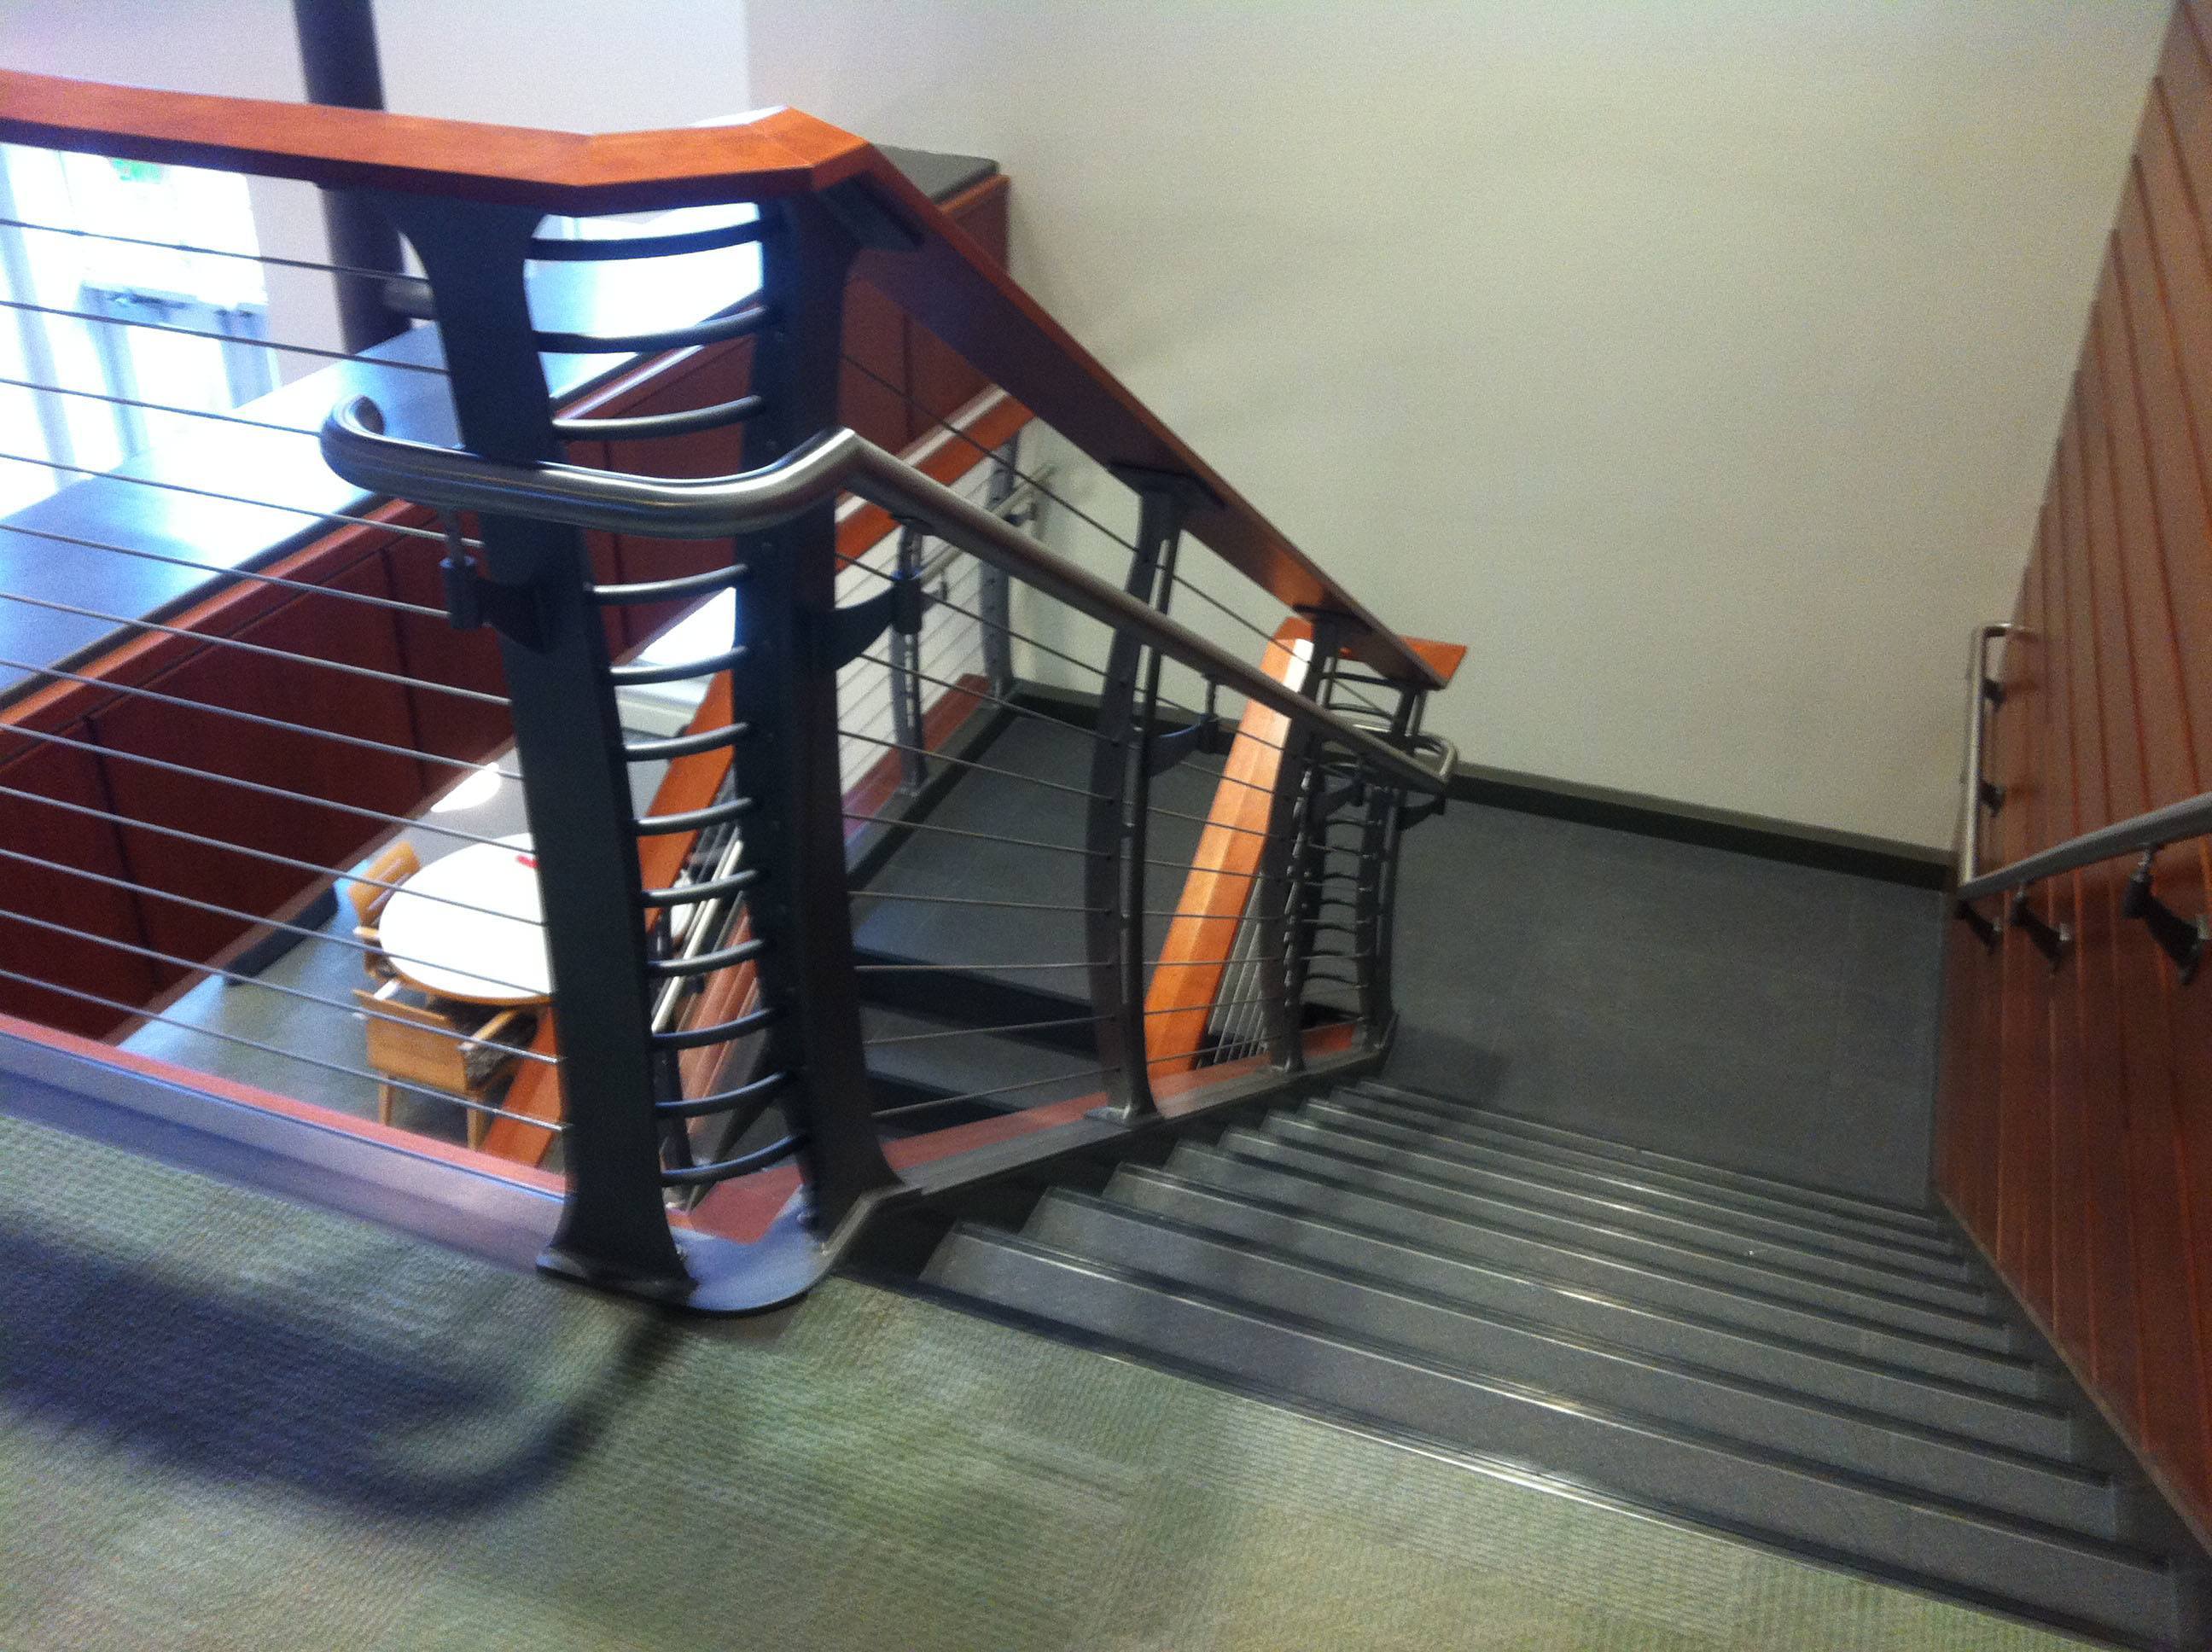 Stainless steel handrail on both sides of the staircase designed to meet the albany college requirements 